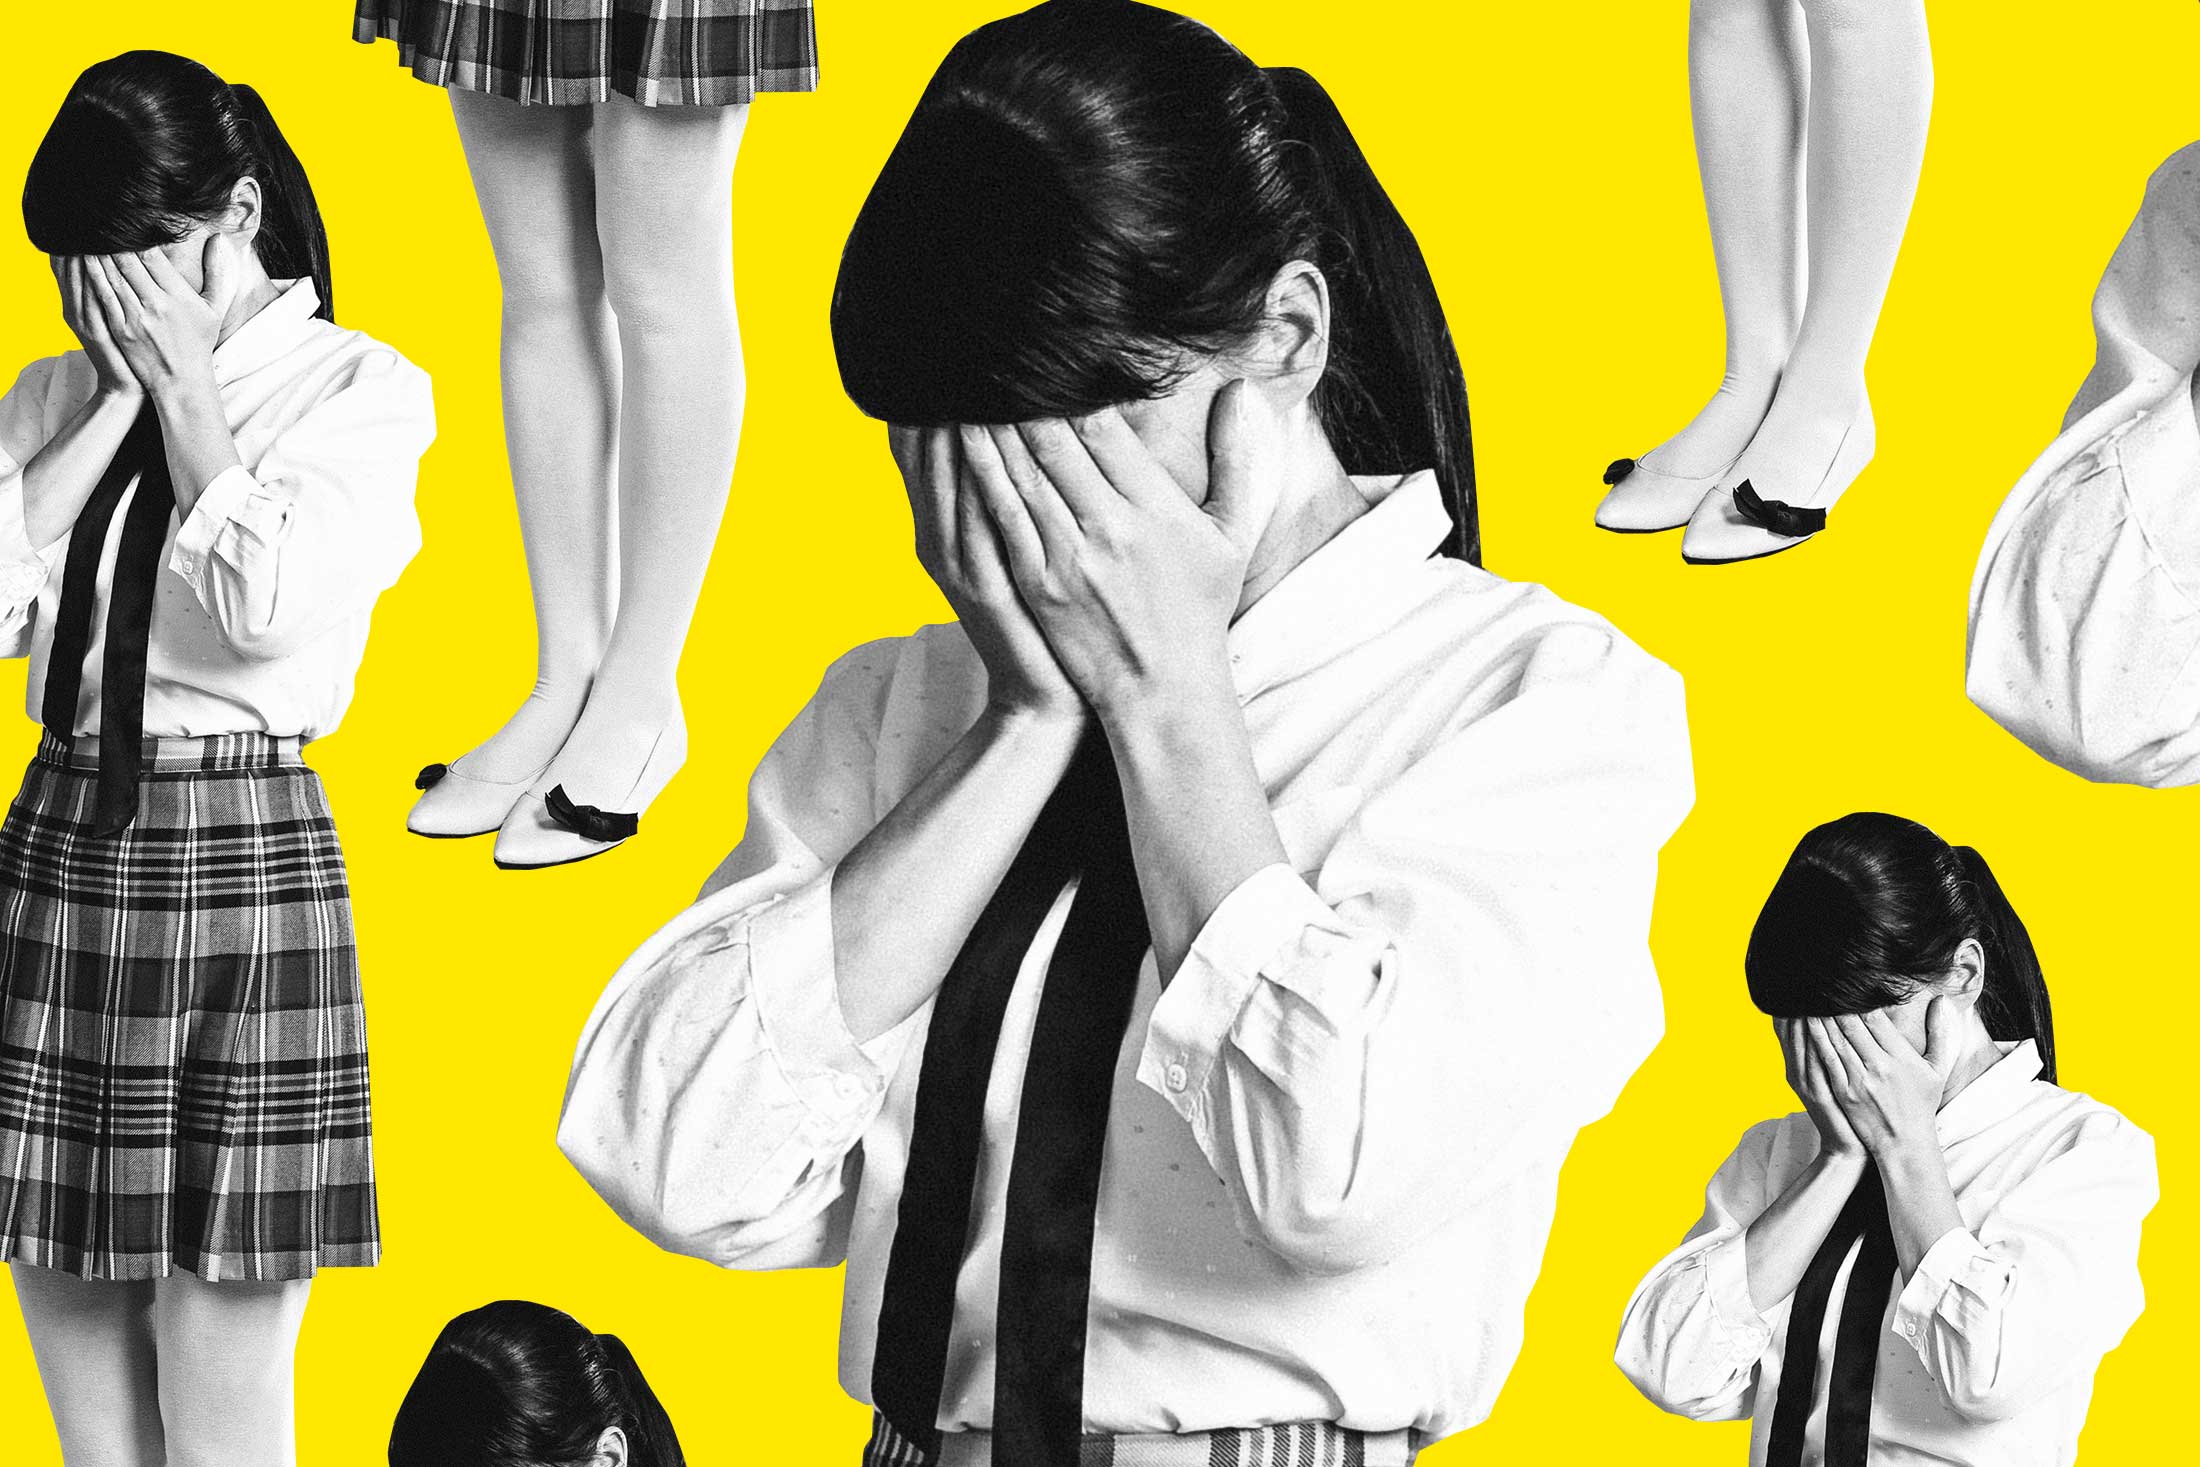 Woman in school uniform covering face, in a repeated pattern on a yellow background.